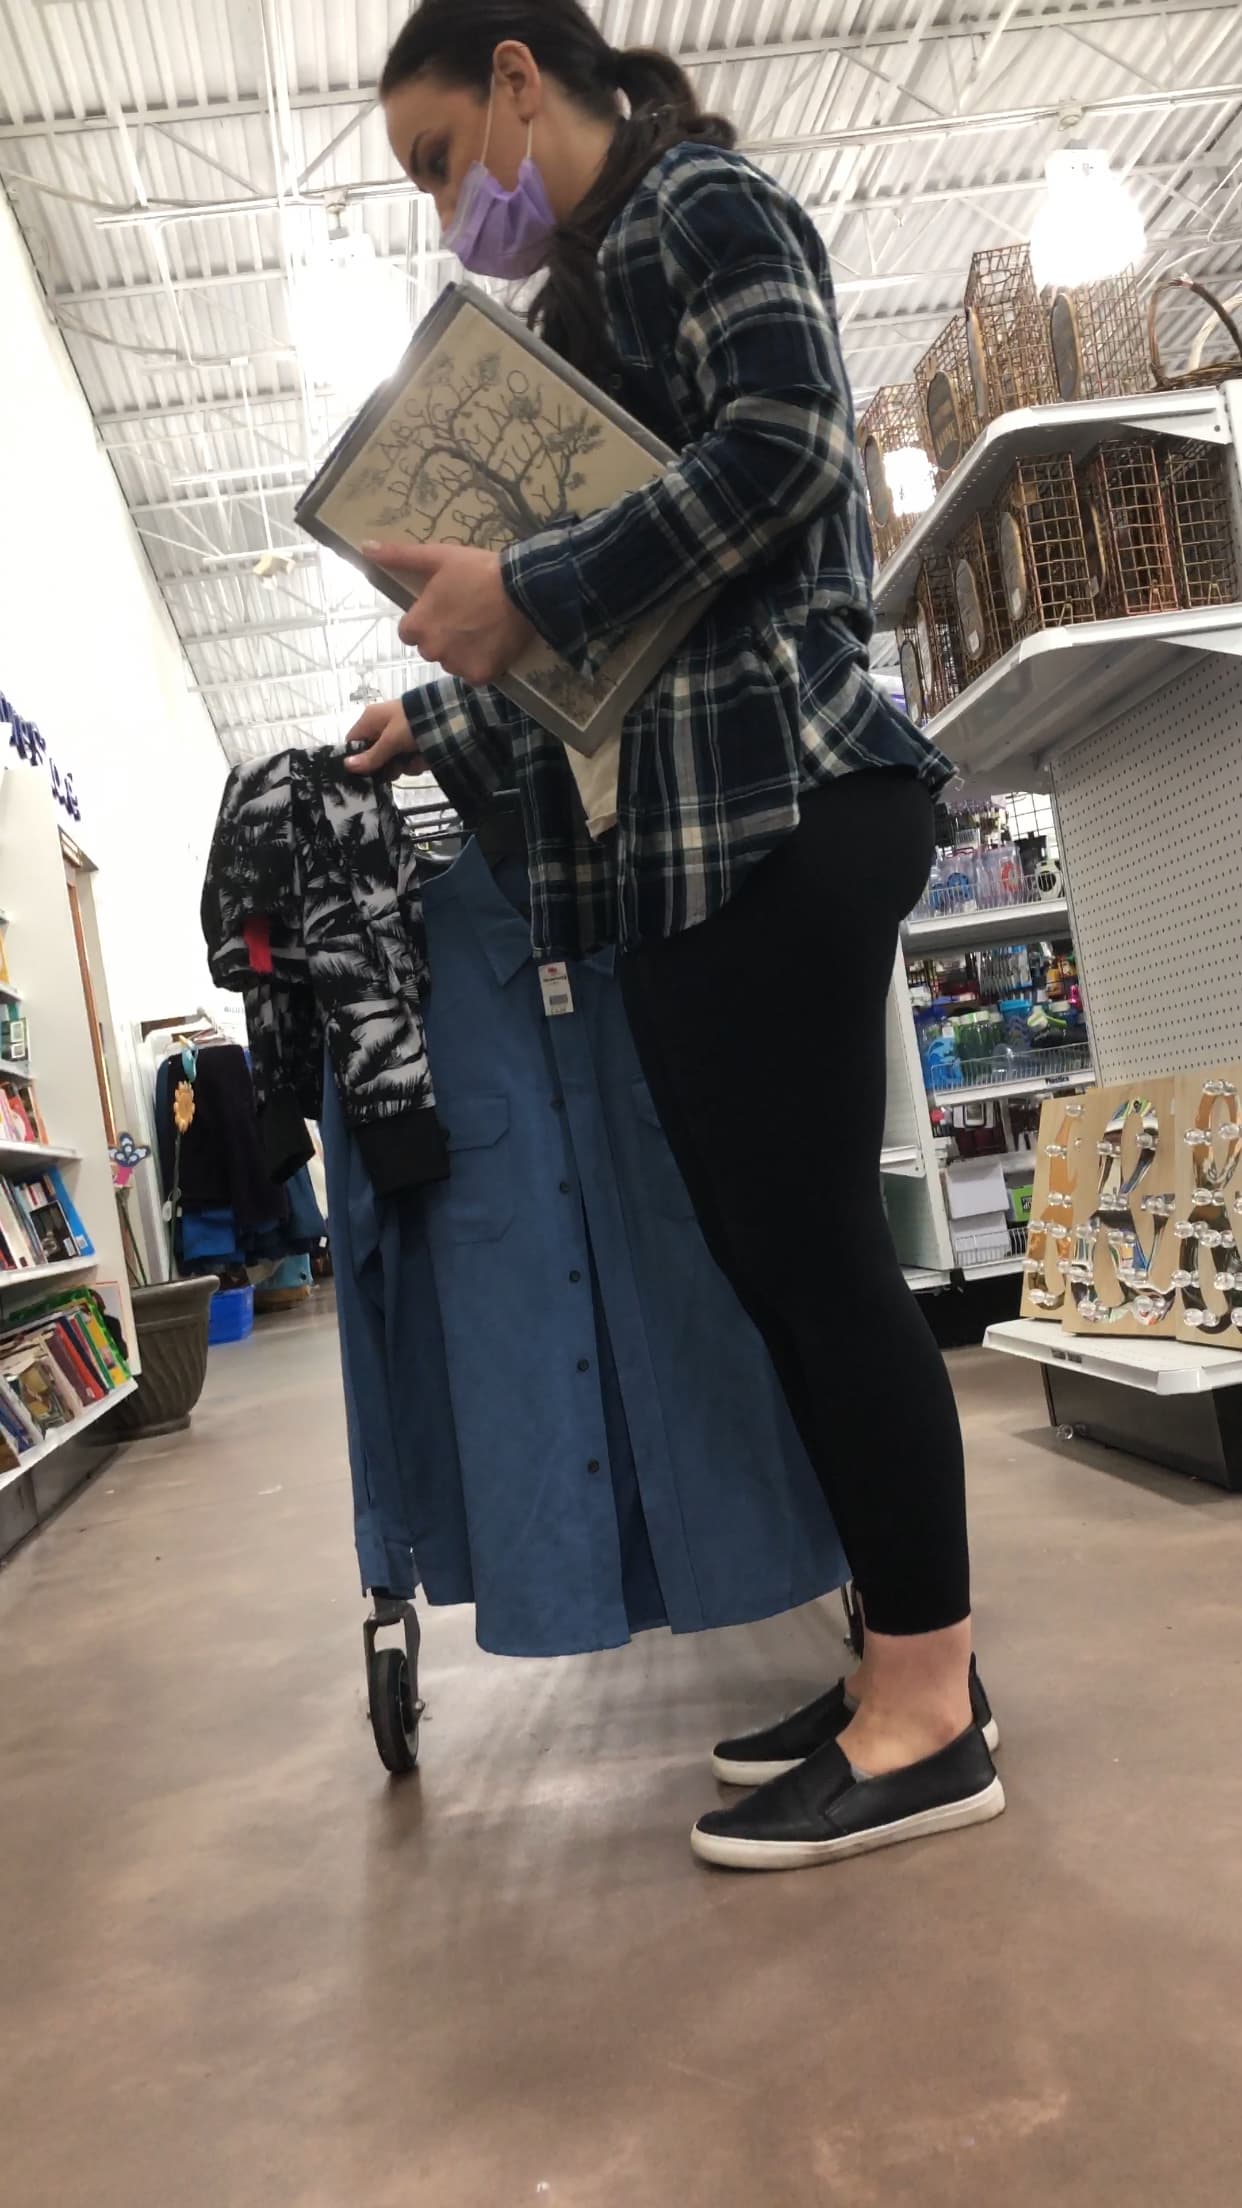 Collection of retail booty 1013 - Forum